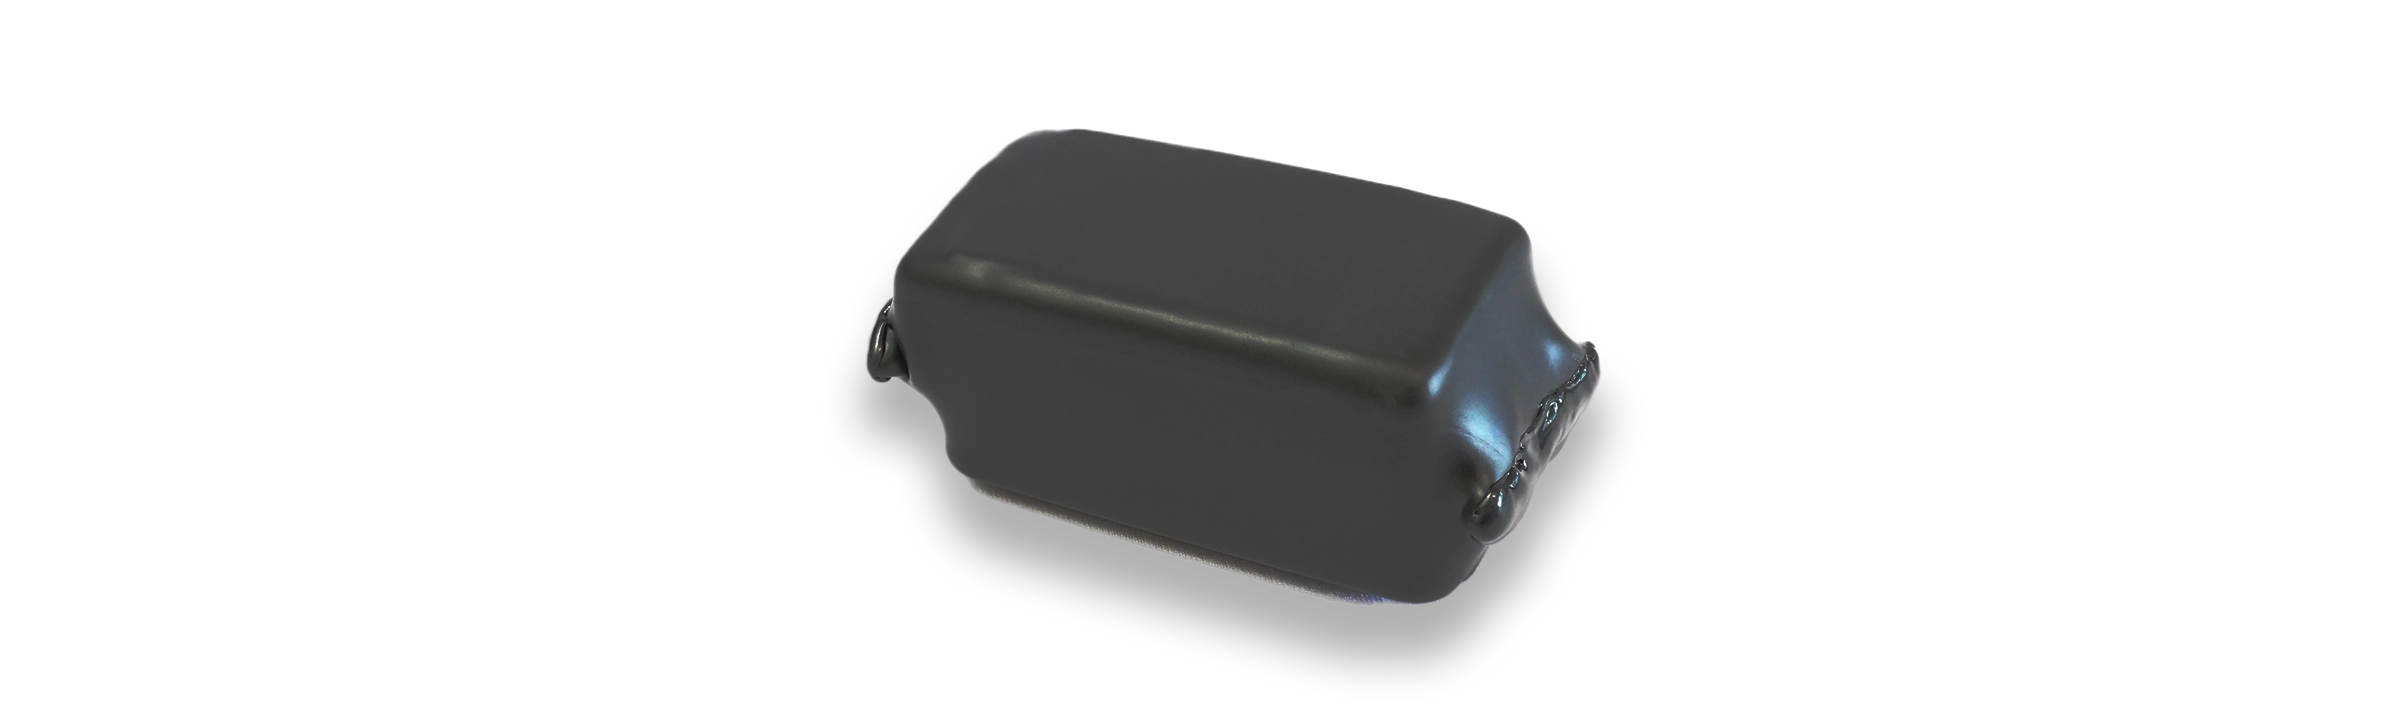 GPS Tracker Global 6700 with no background